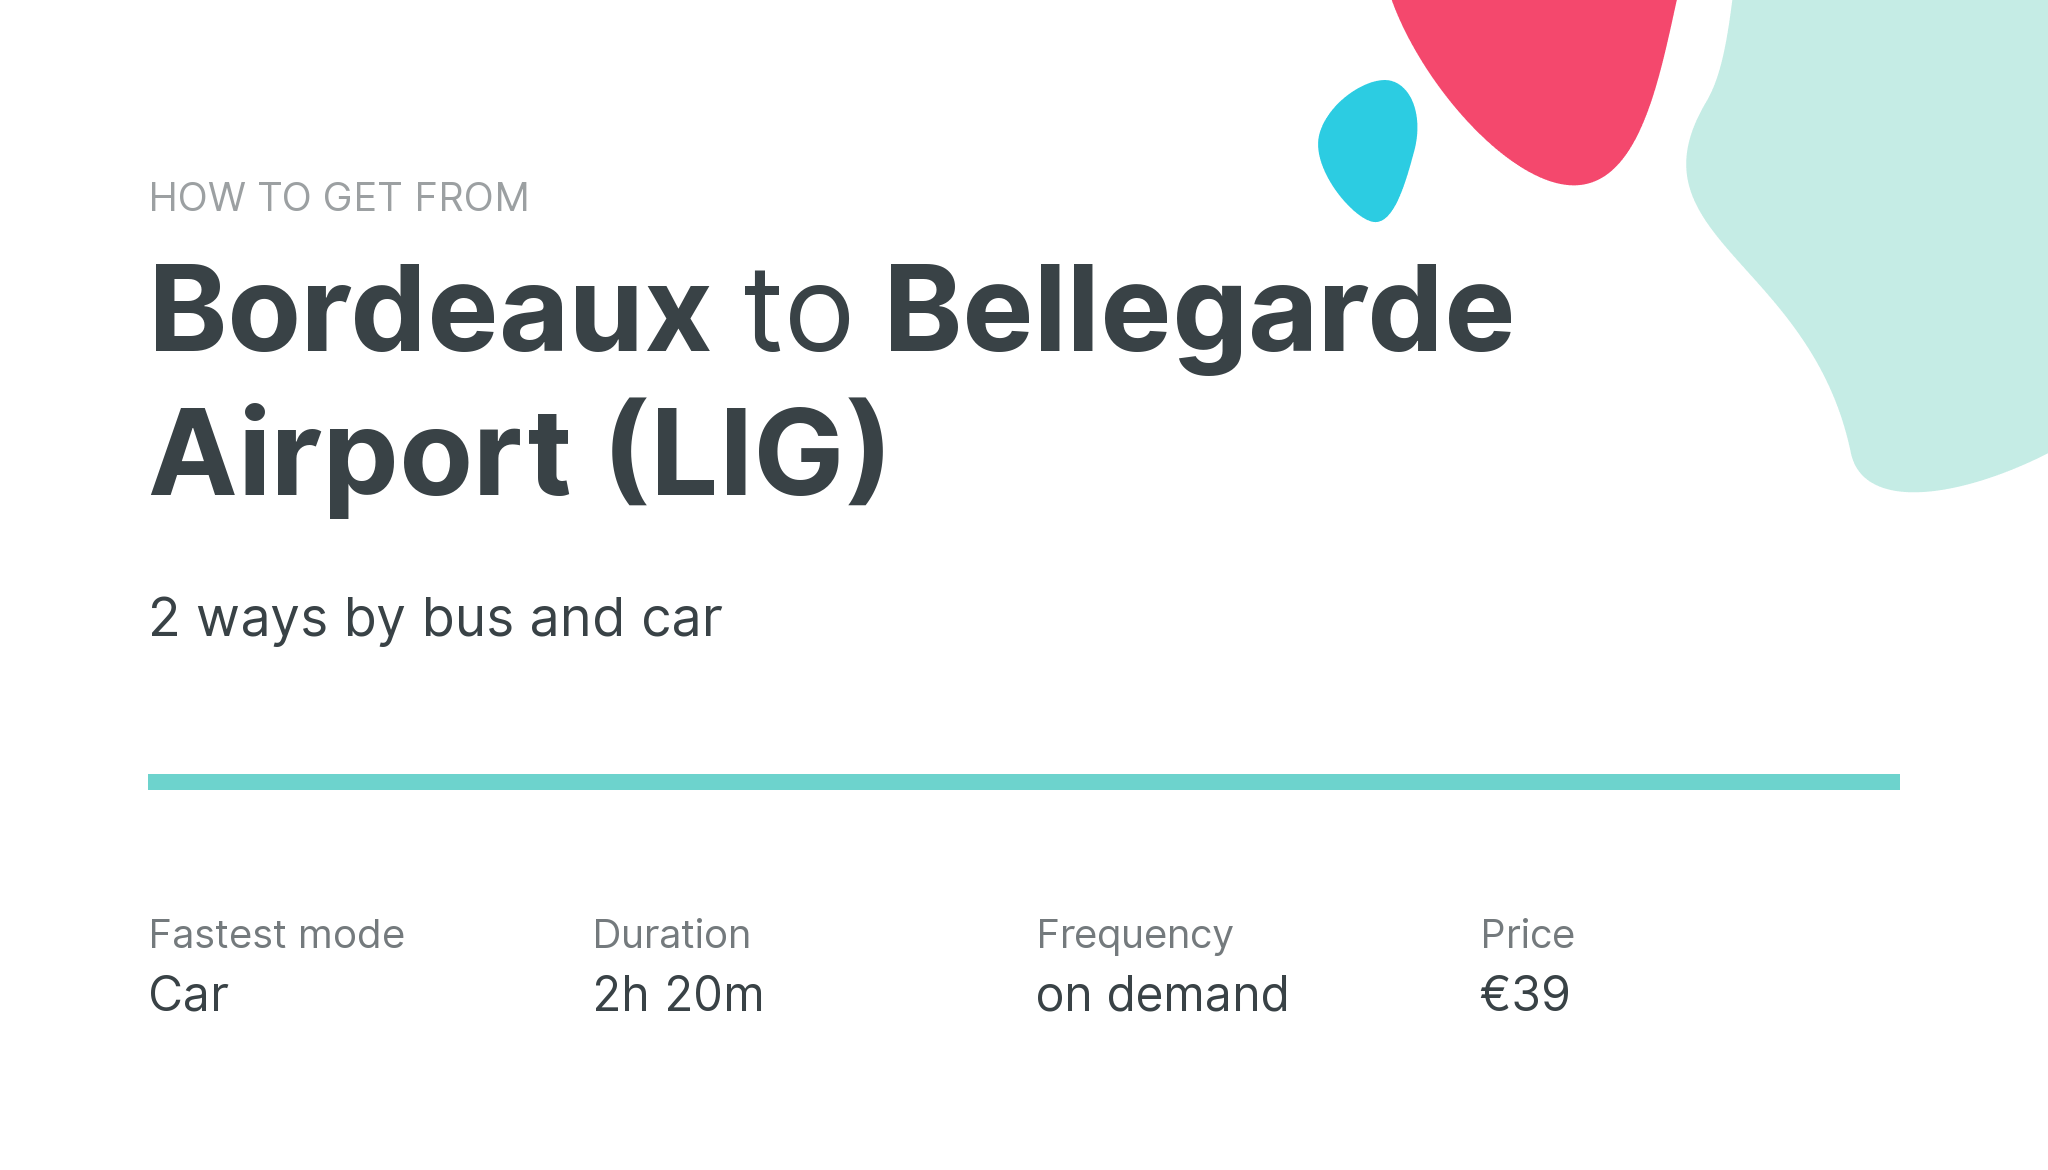 How do I get from Bordeaux to Bellegarde Airport (LIG)